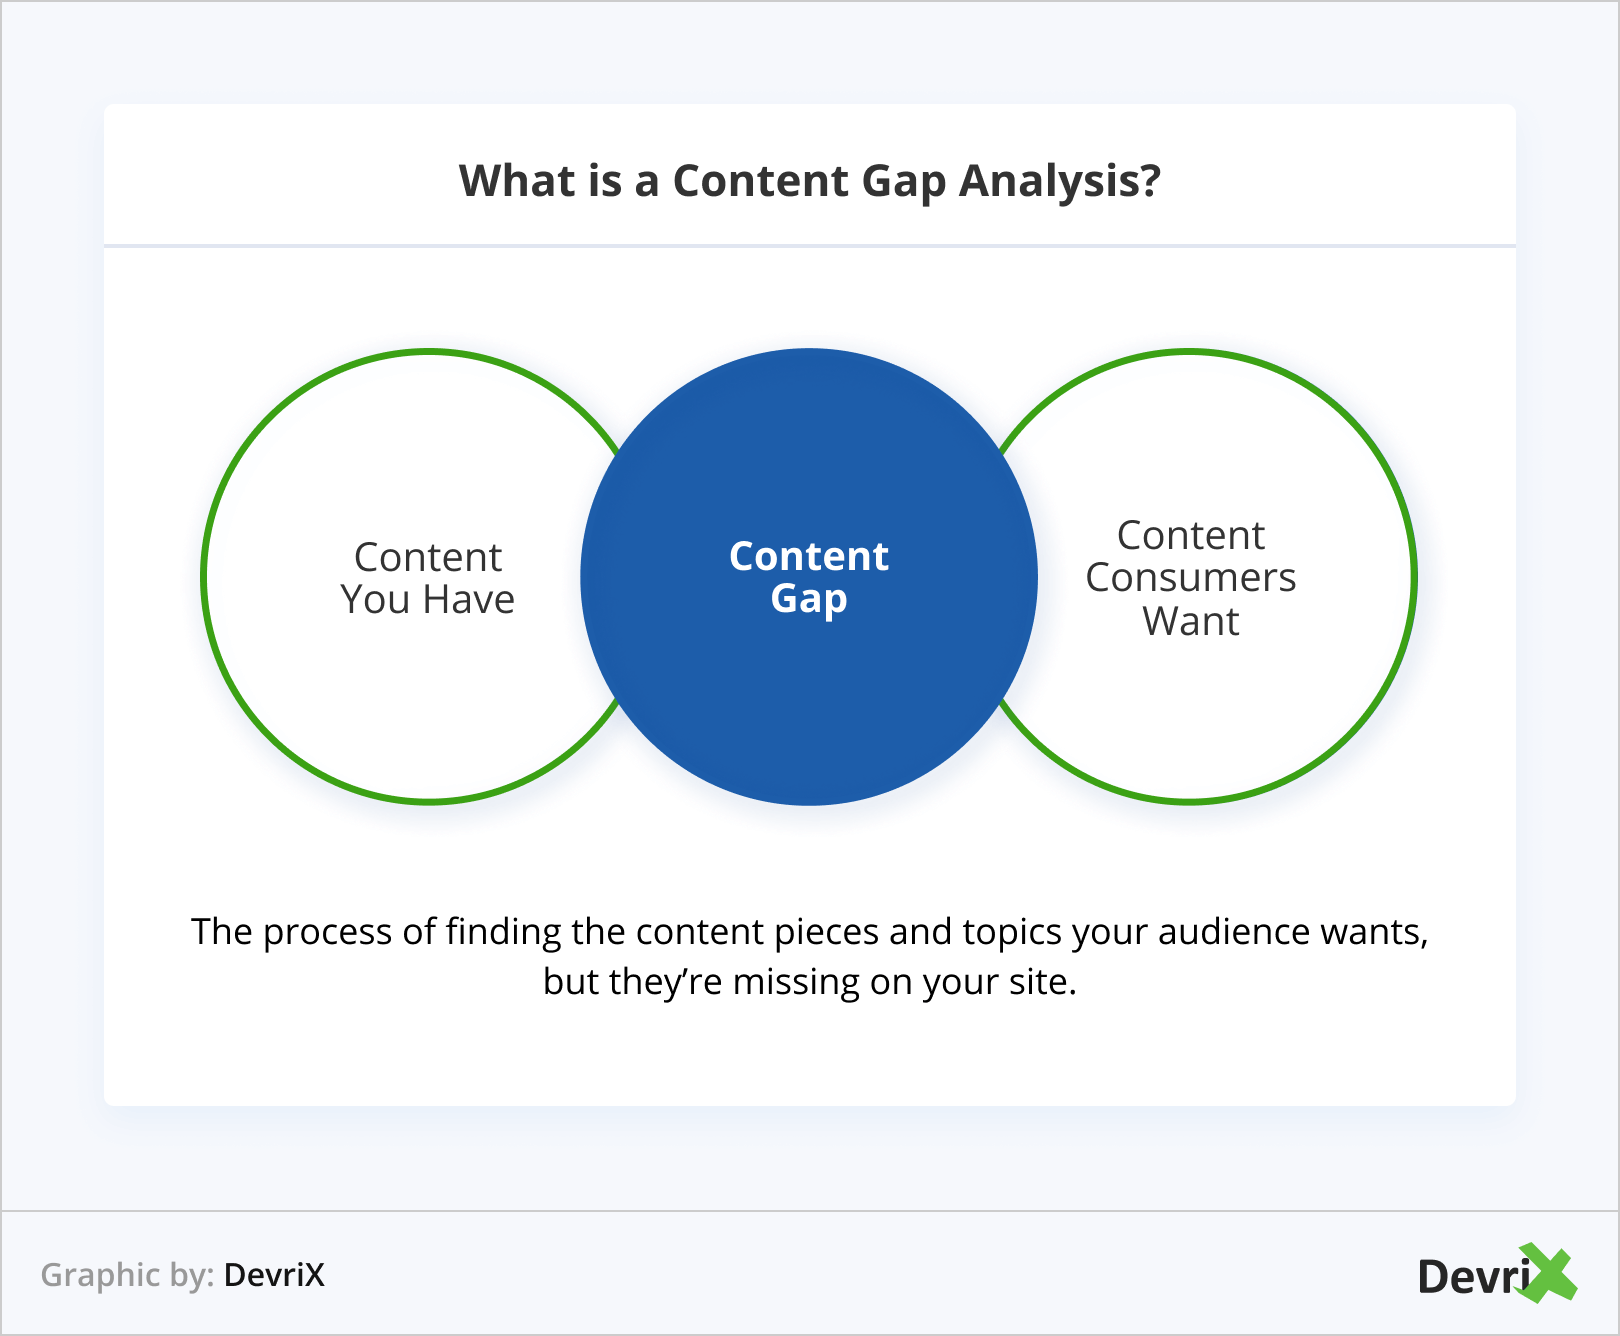 What is a Content Gap Analysis